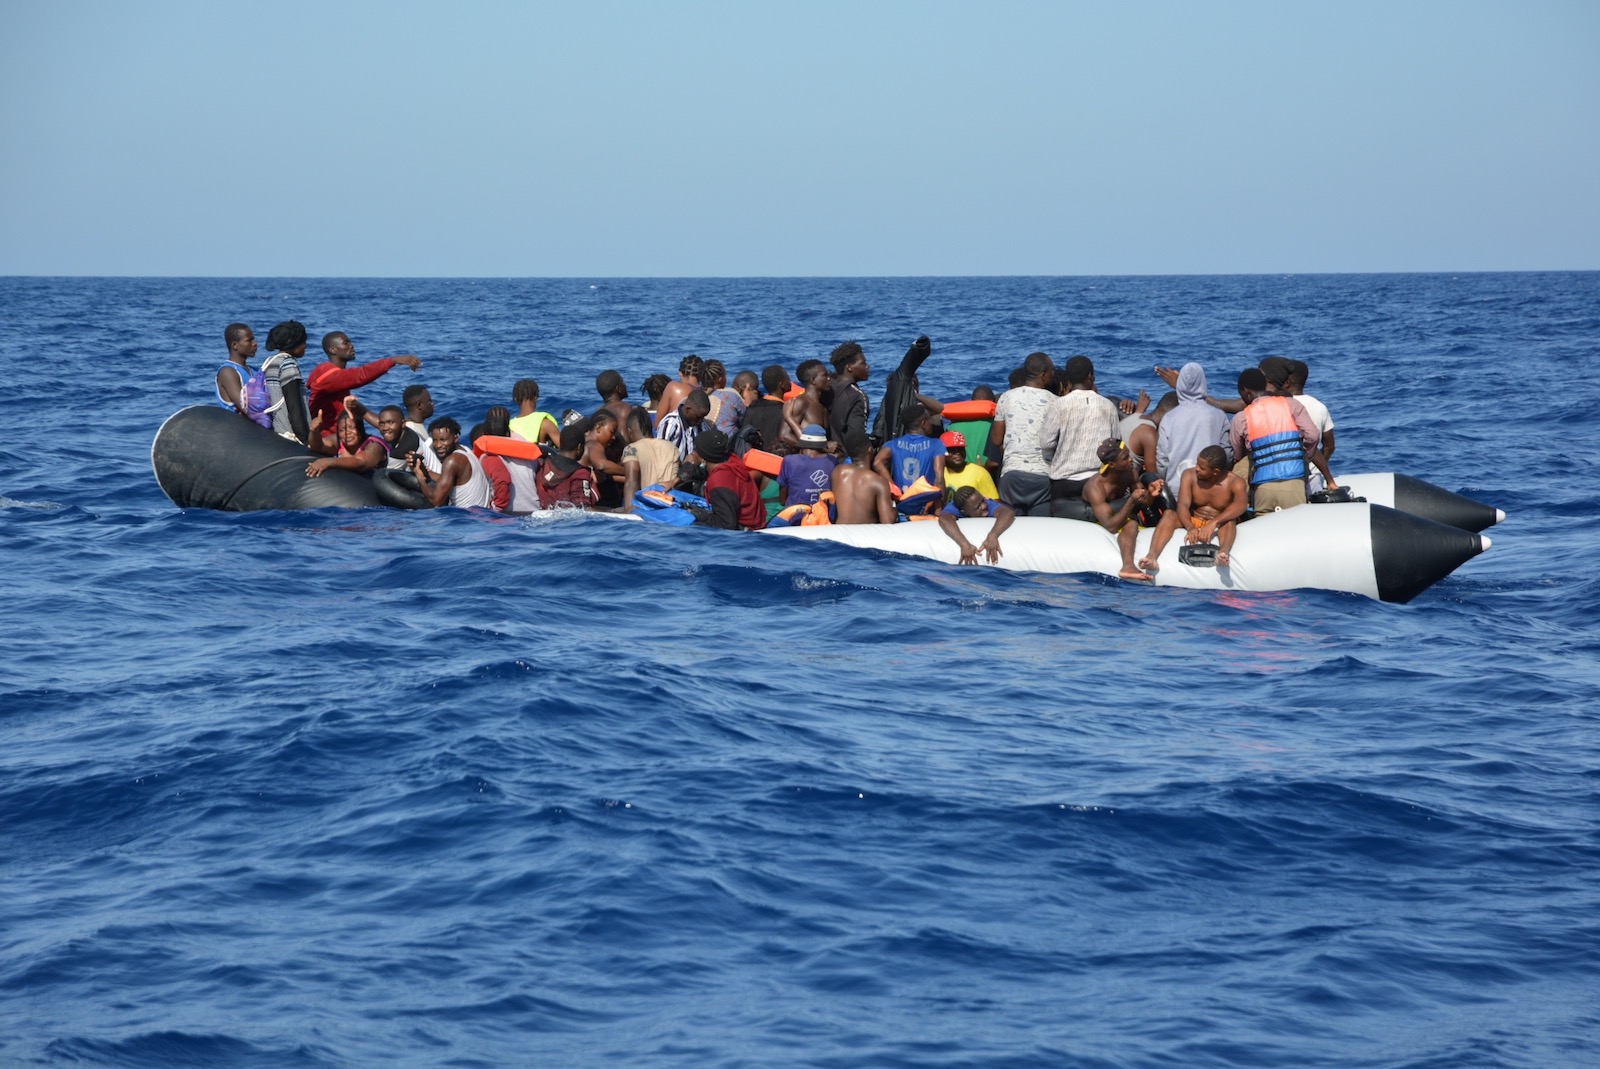 A boat filled with people at sea